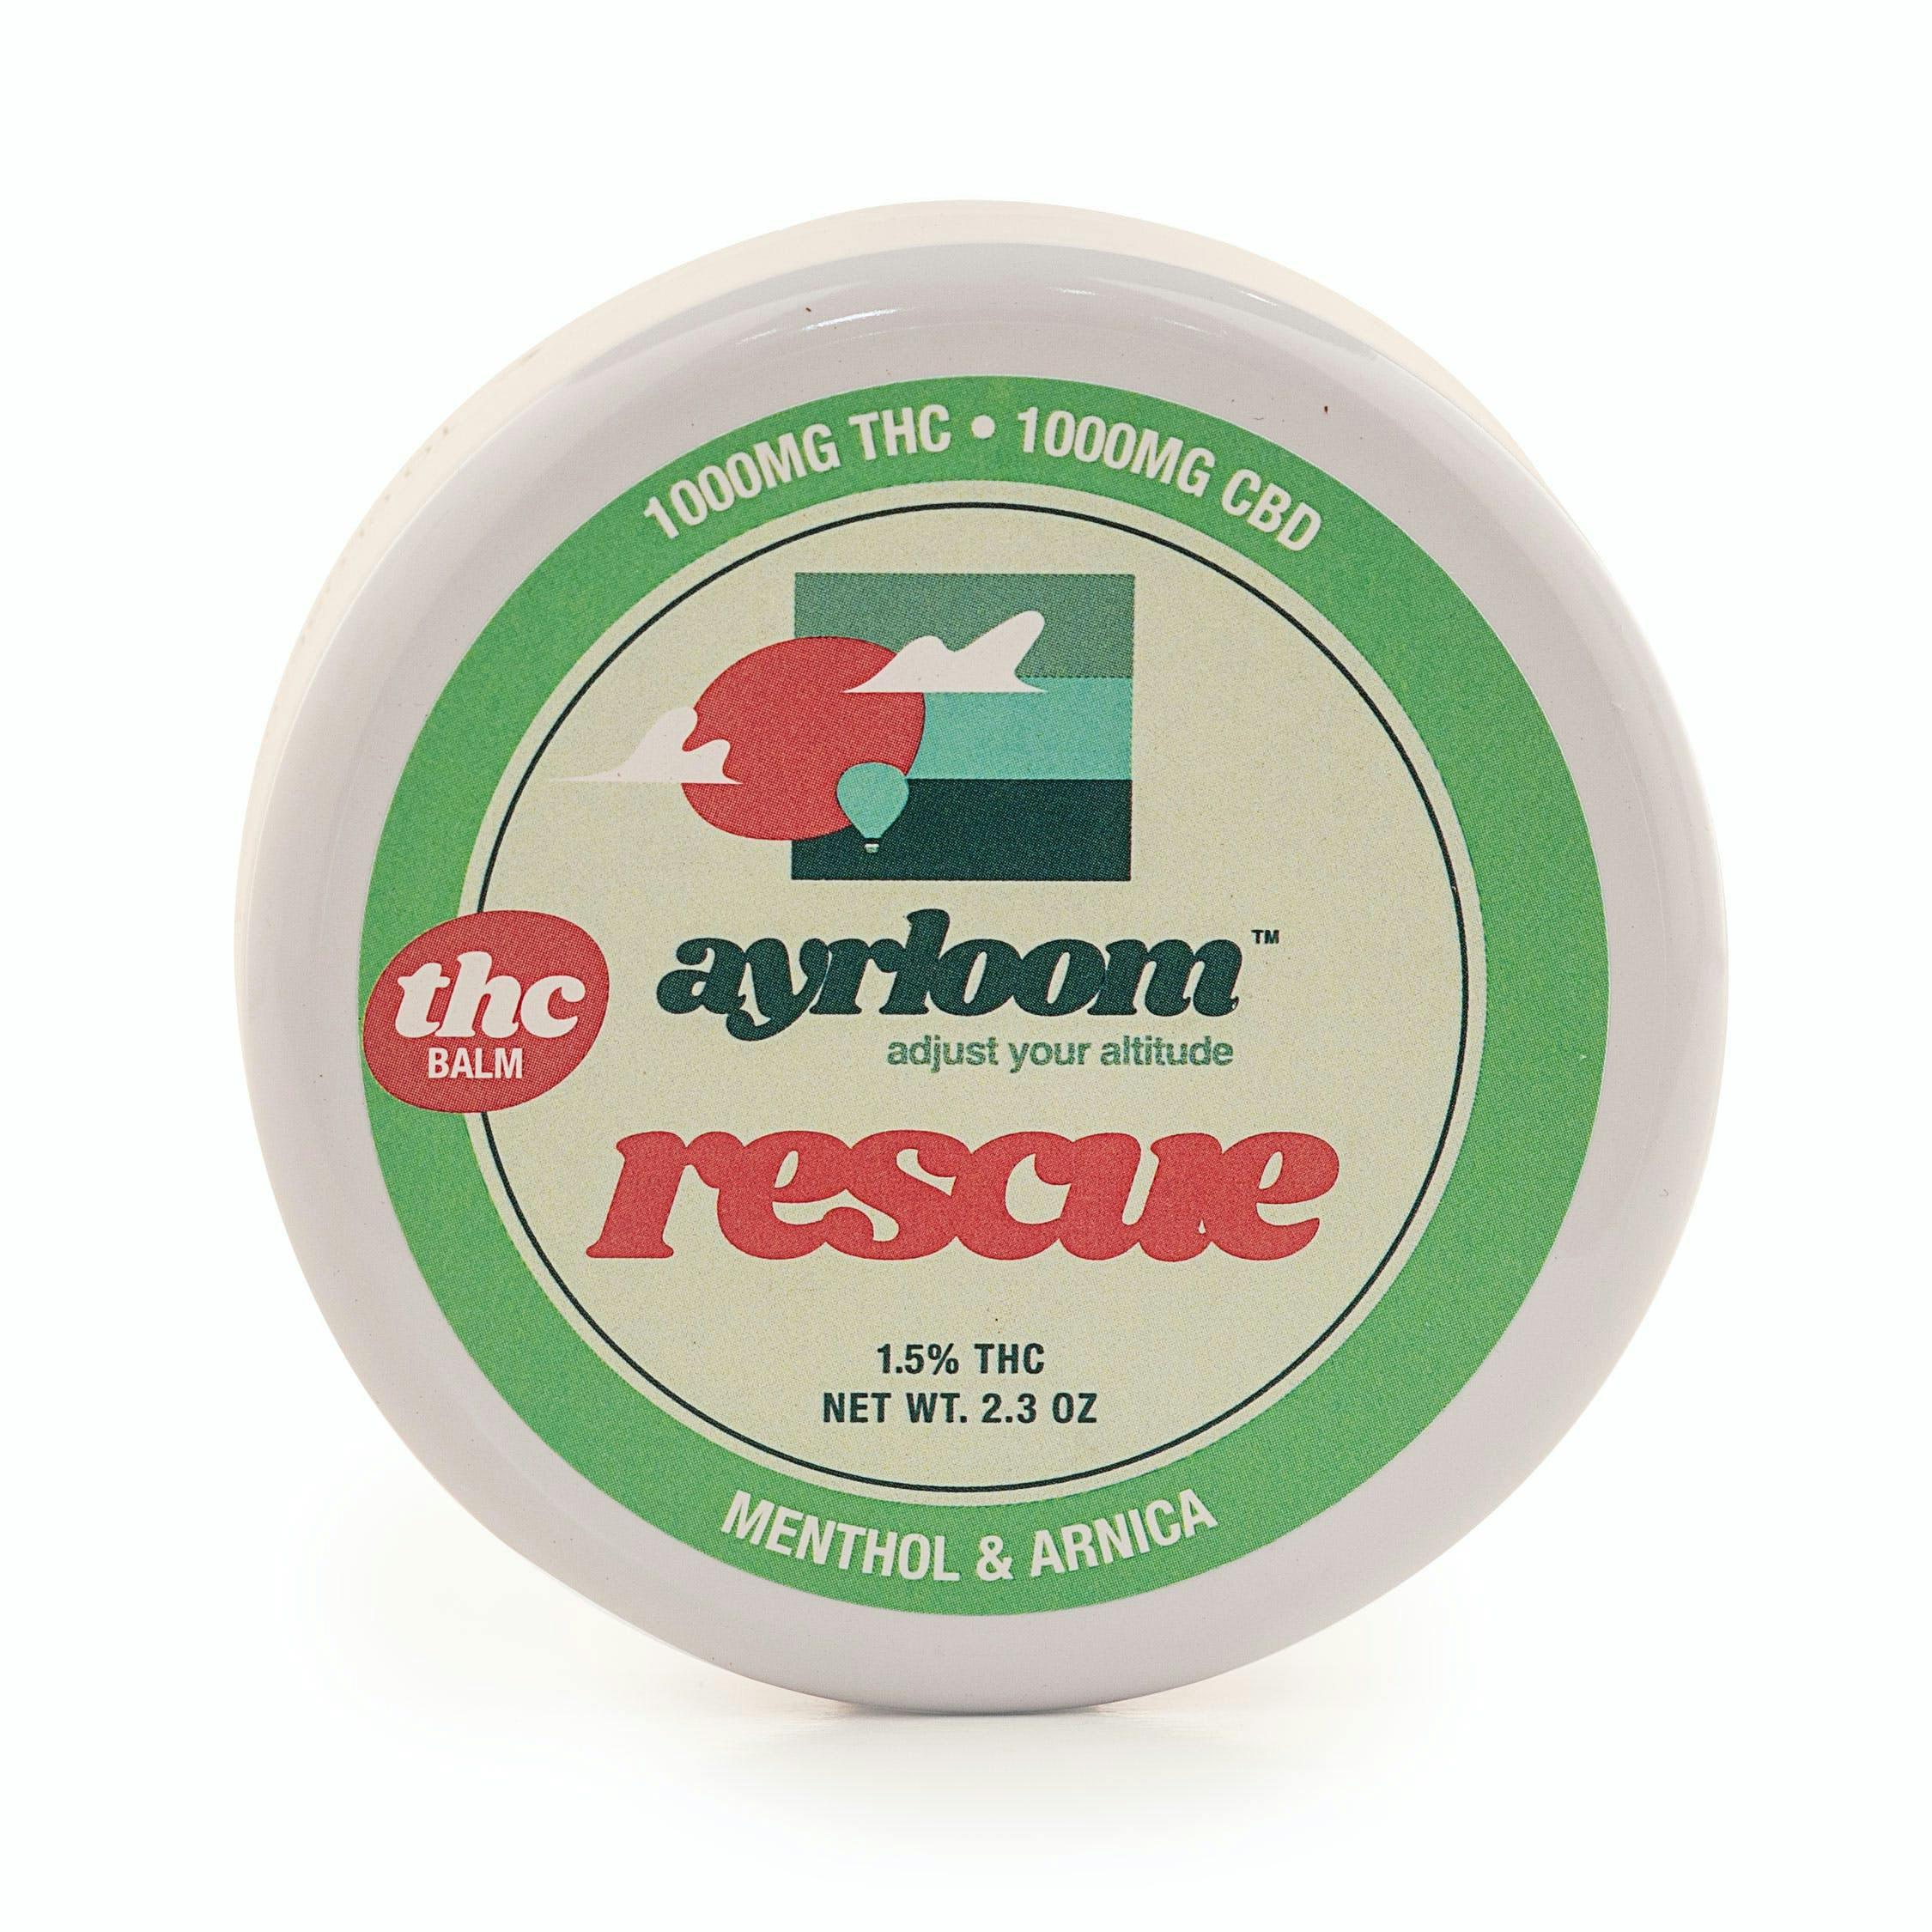 Rescue • Balm - ayrloom - TOPICALS - Rockland County Weed Delivery | Treehouse Cannabis